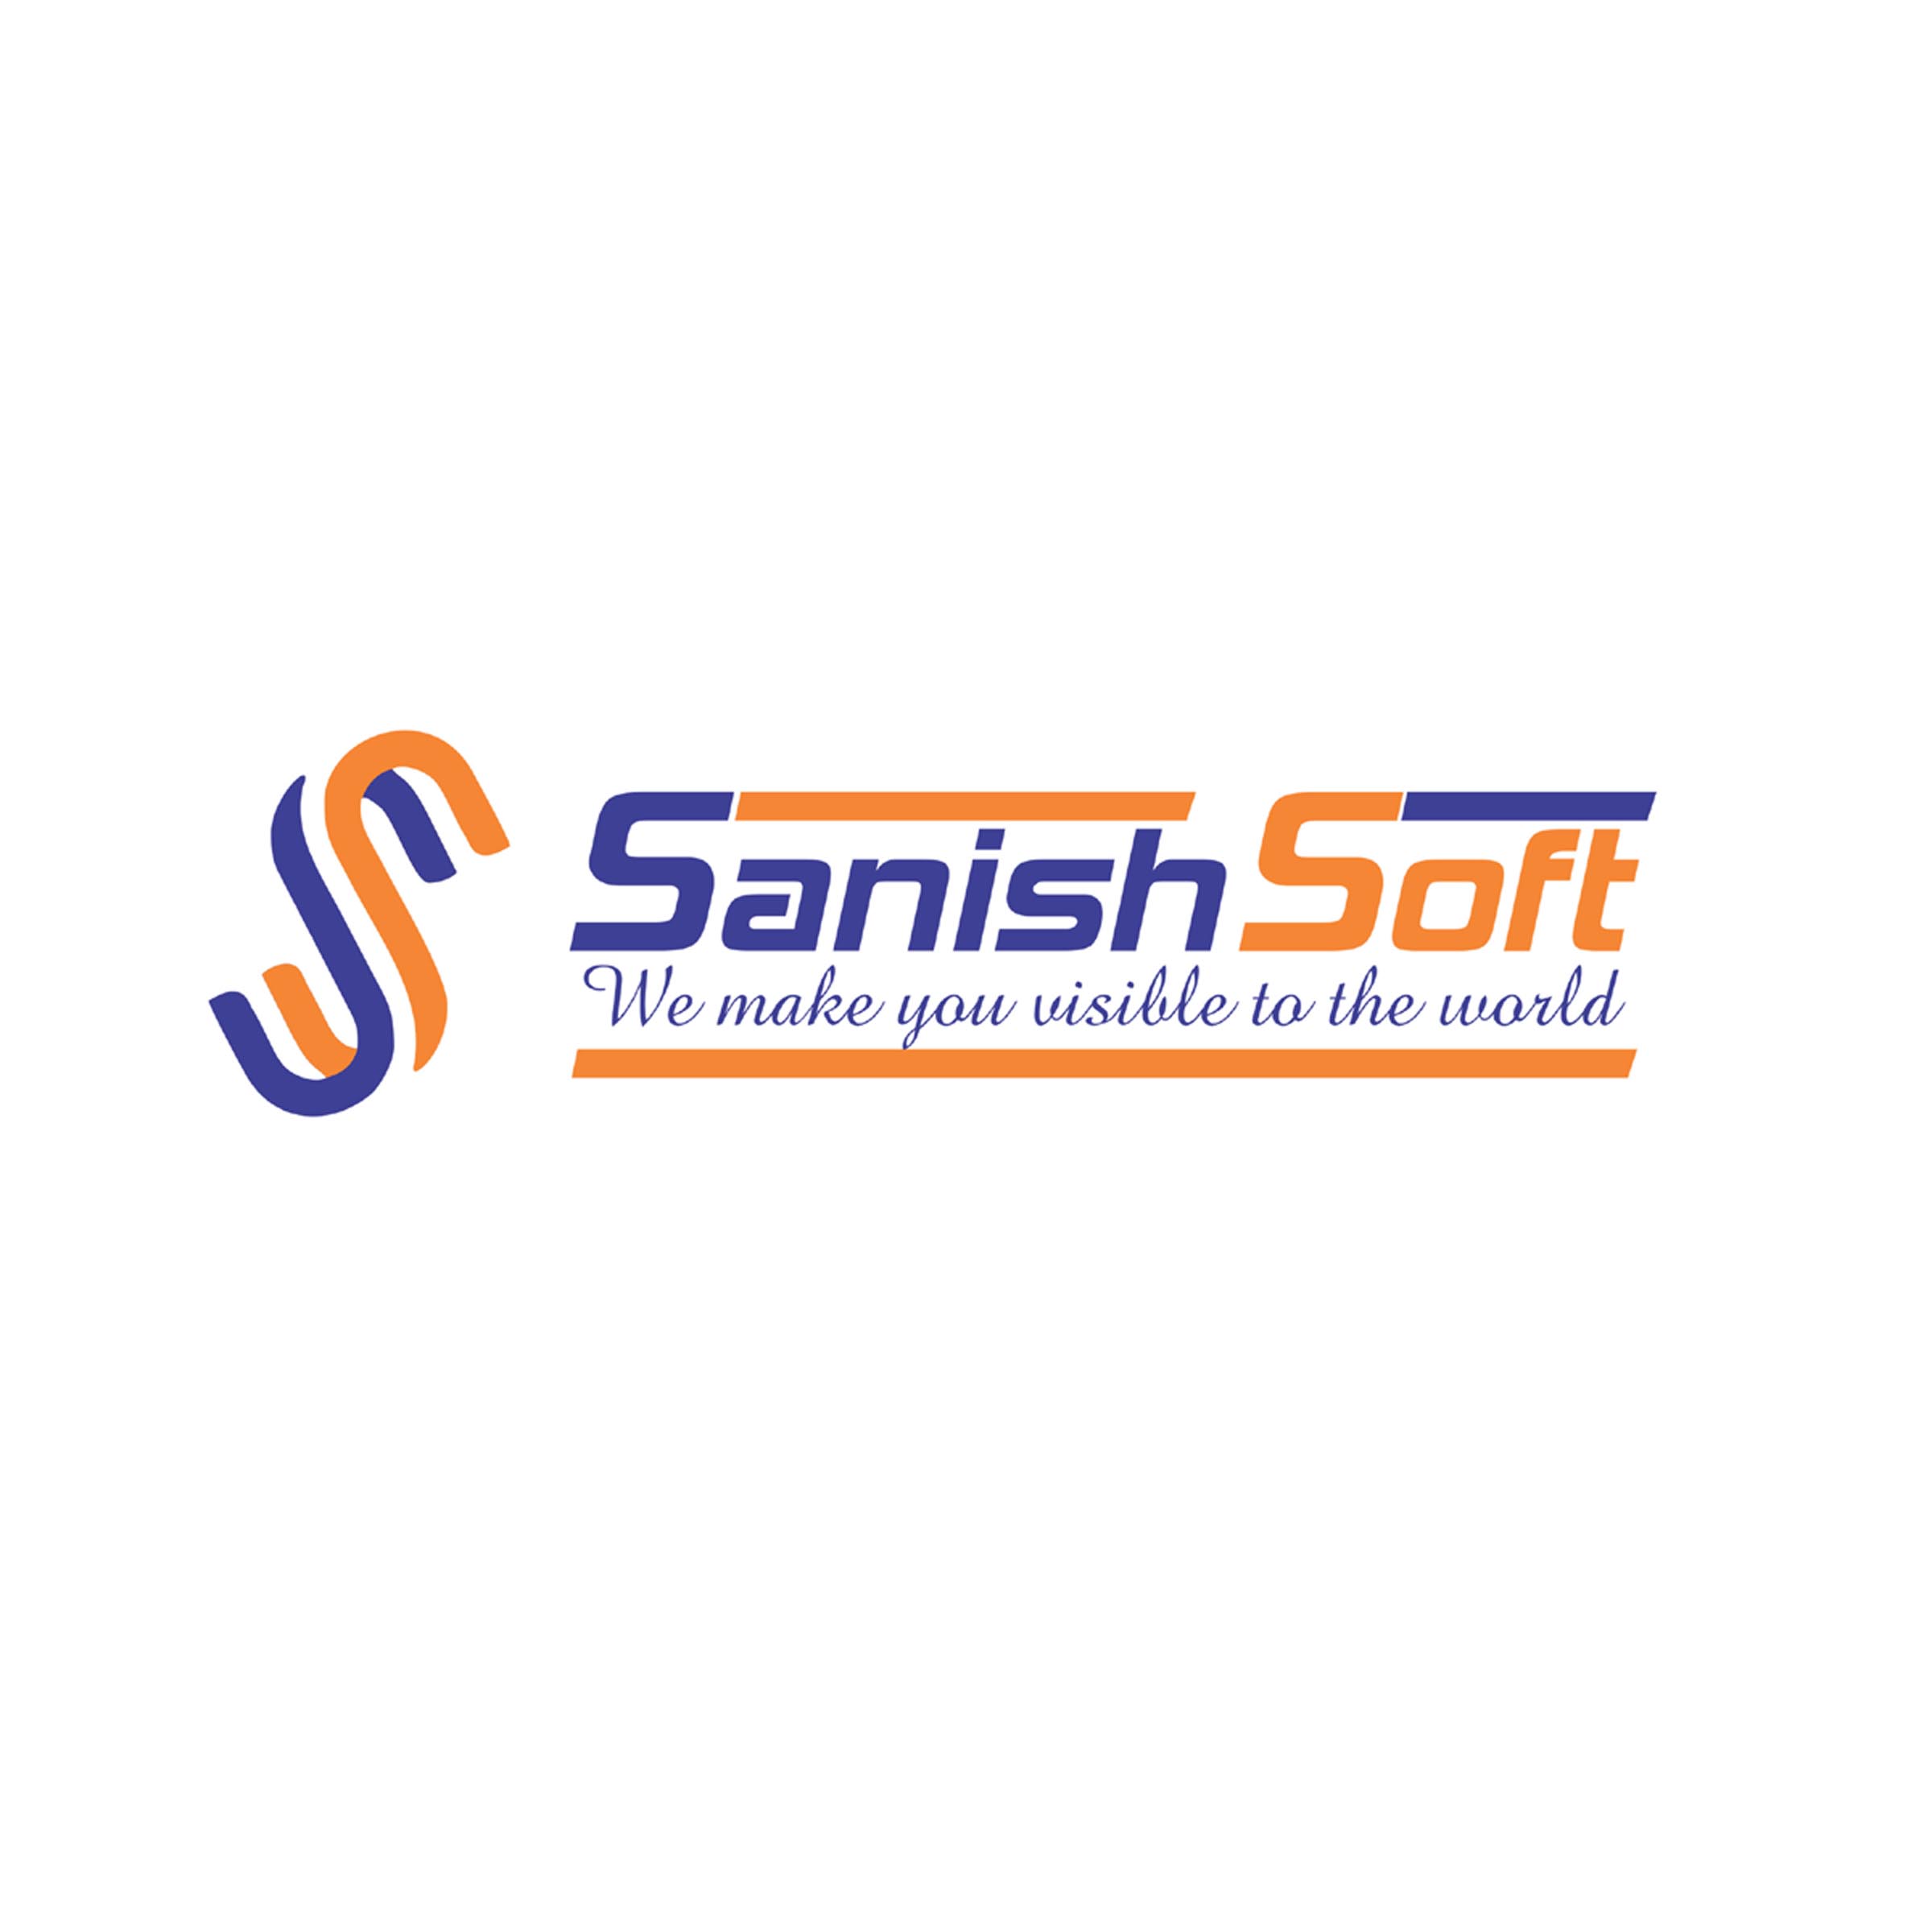 Sanishsoft Website Design Company|Accounting Services|Professional Services